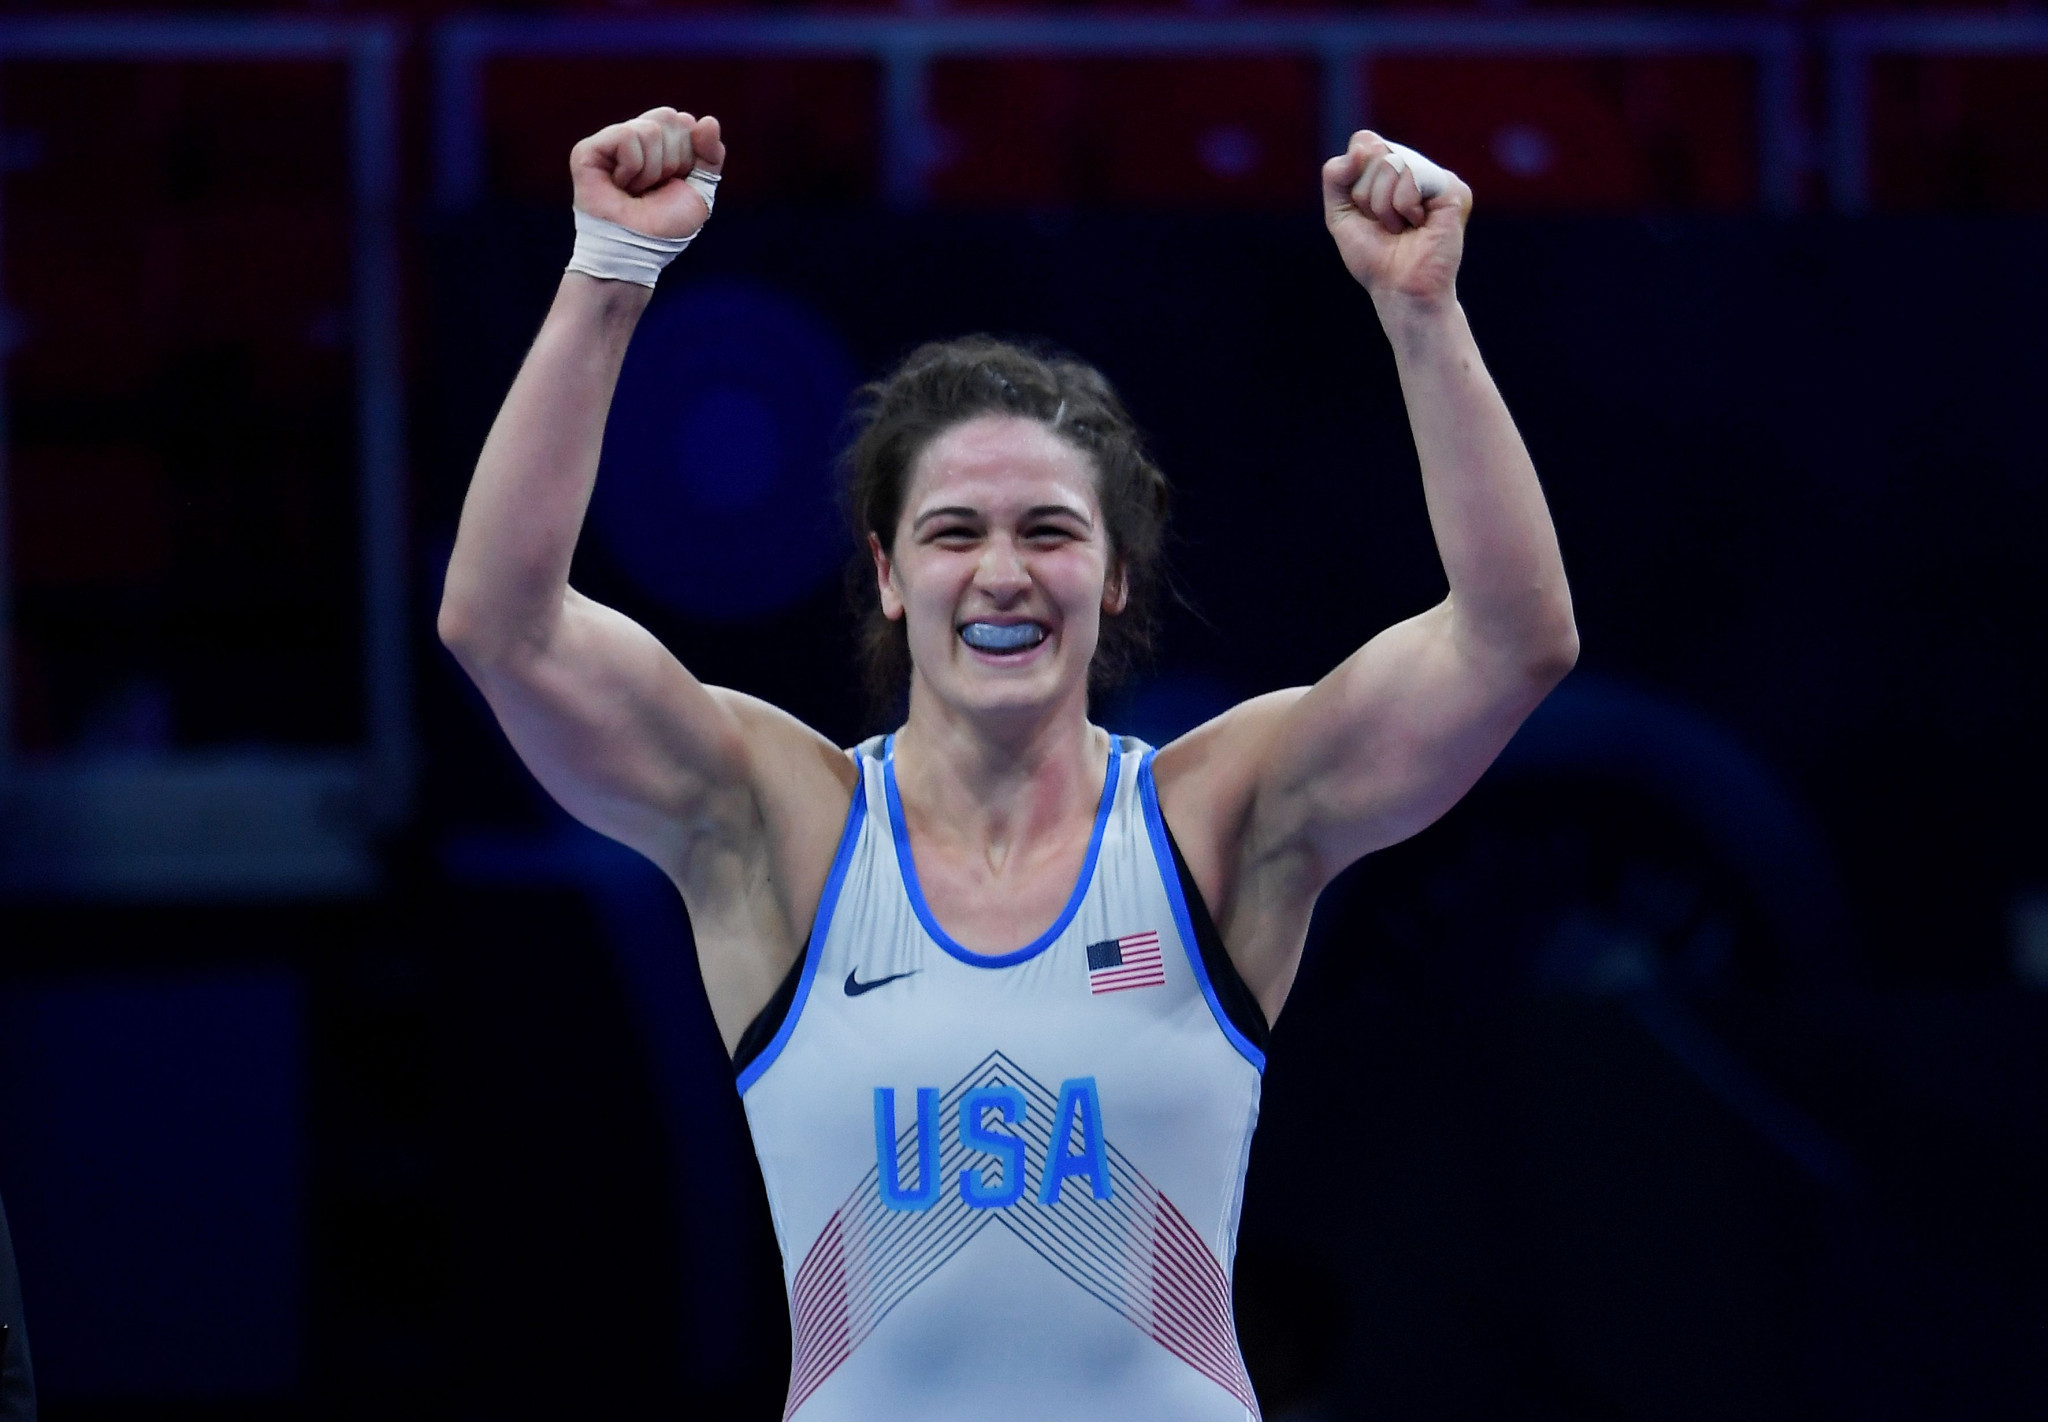 Adeline Gray earned gold in the women's 76kg division ©Getty Images